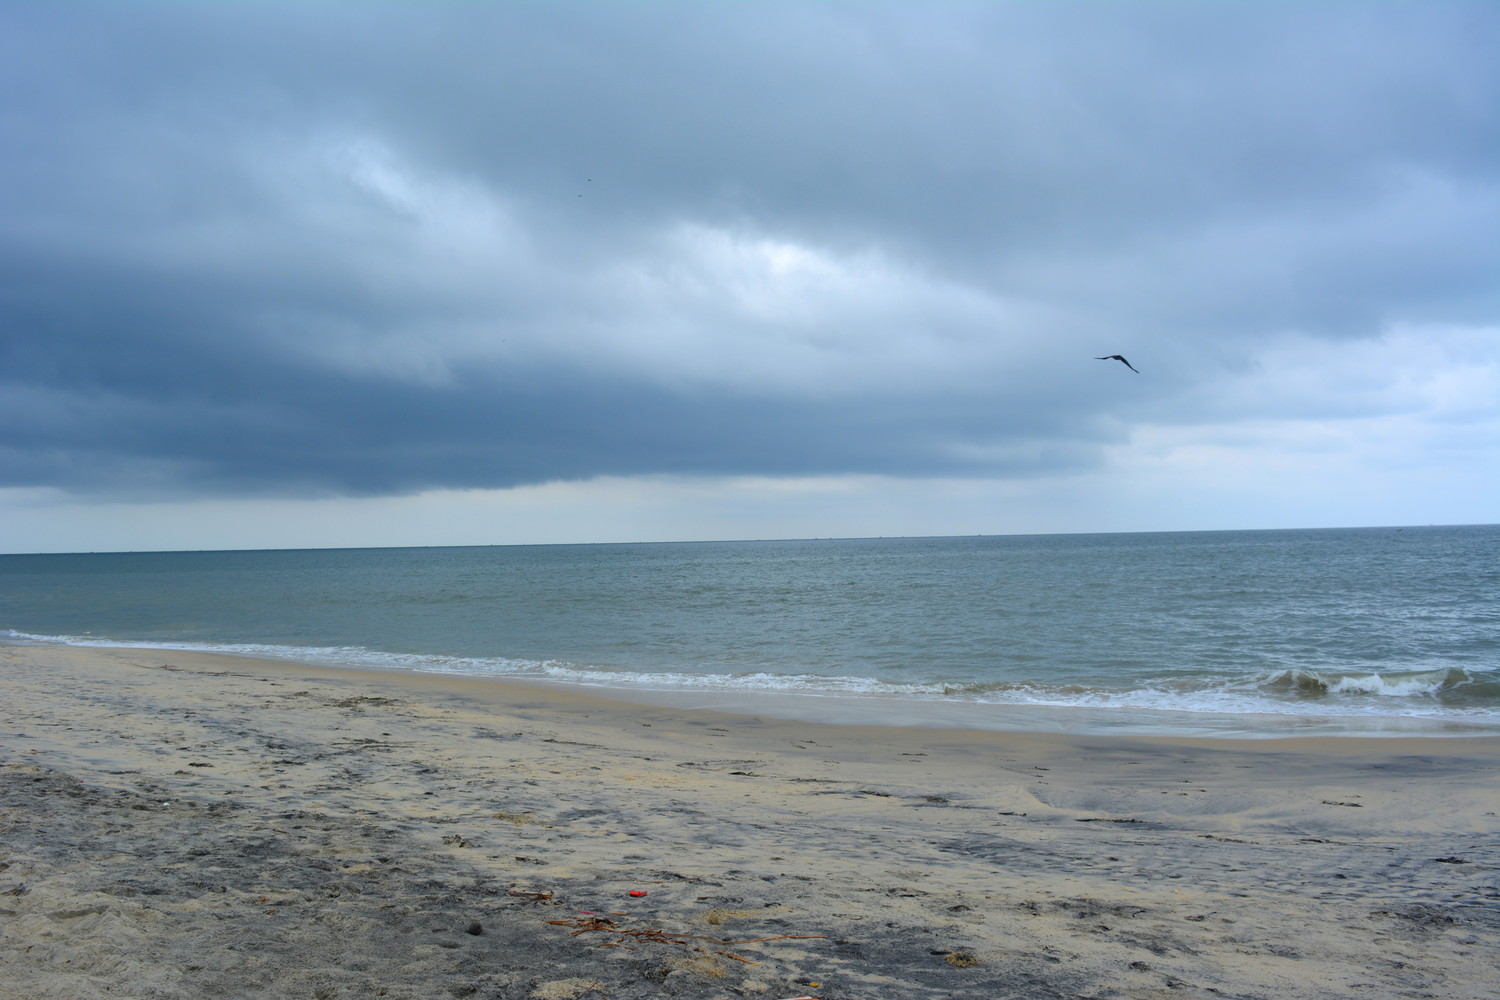 Beach with partially dark sand and a crow flying under the overcast sky